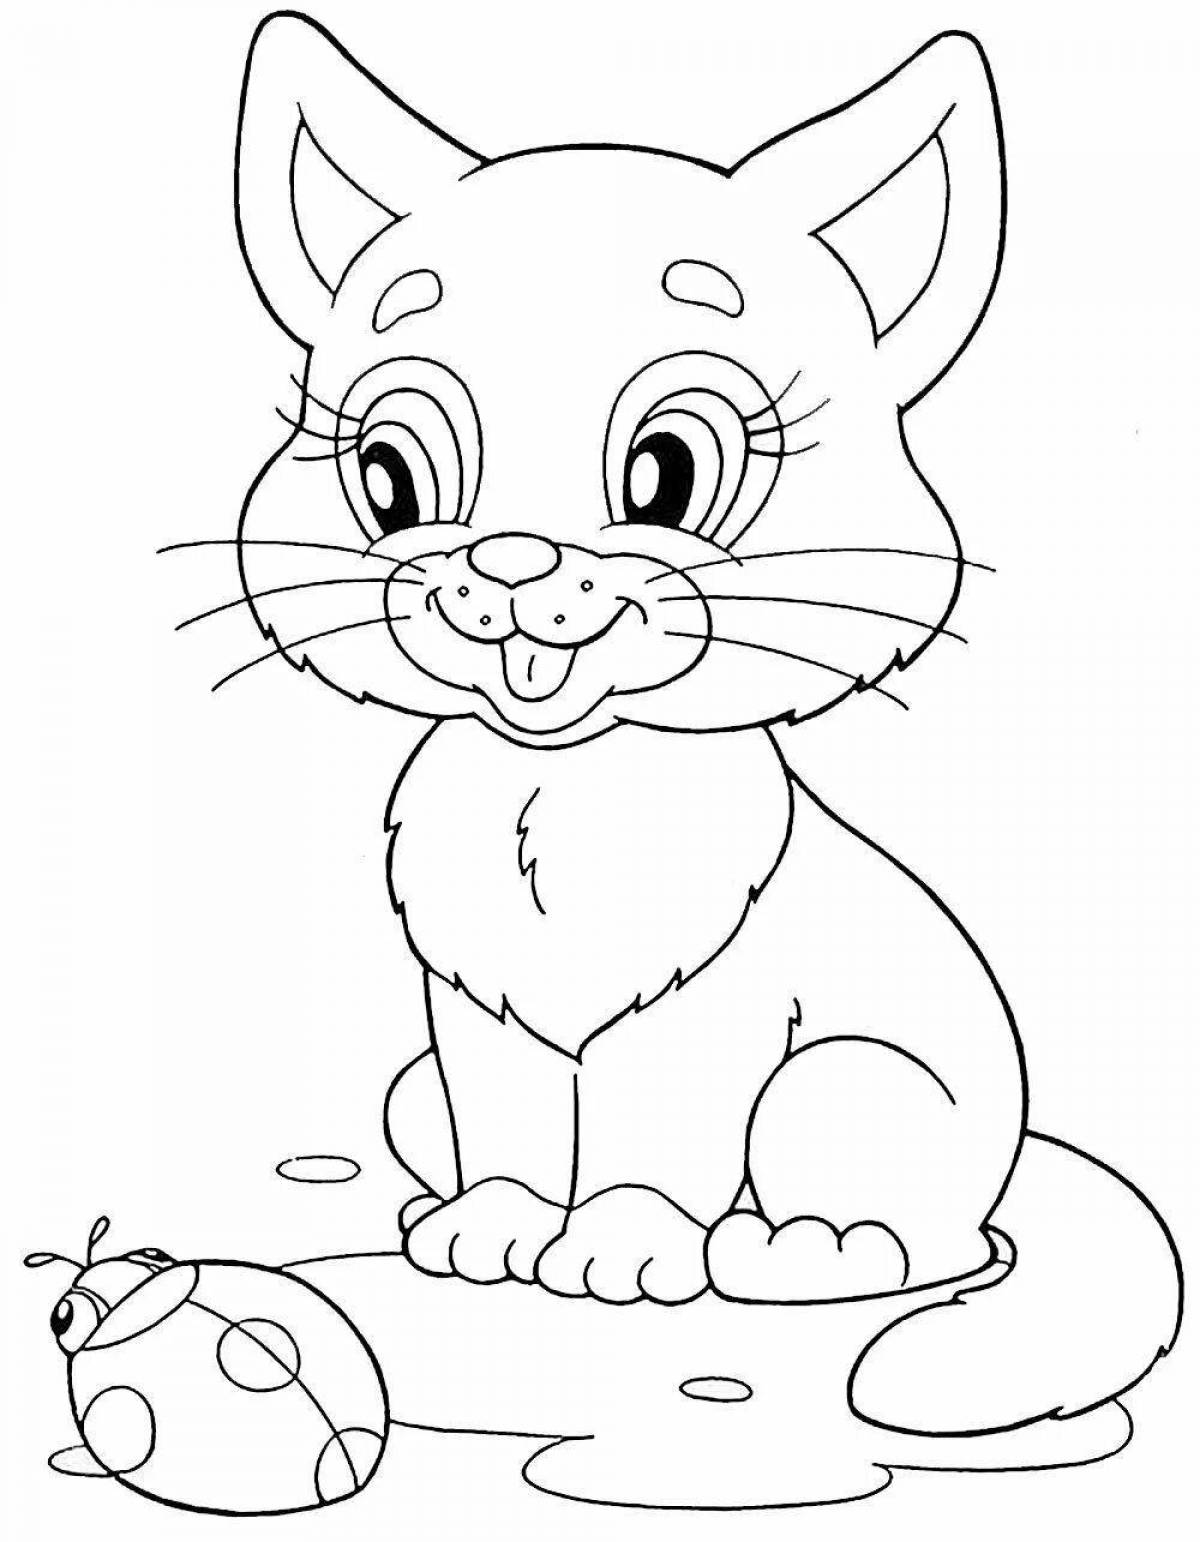 Magic animal coloring pages for kids 5-6 years old